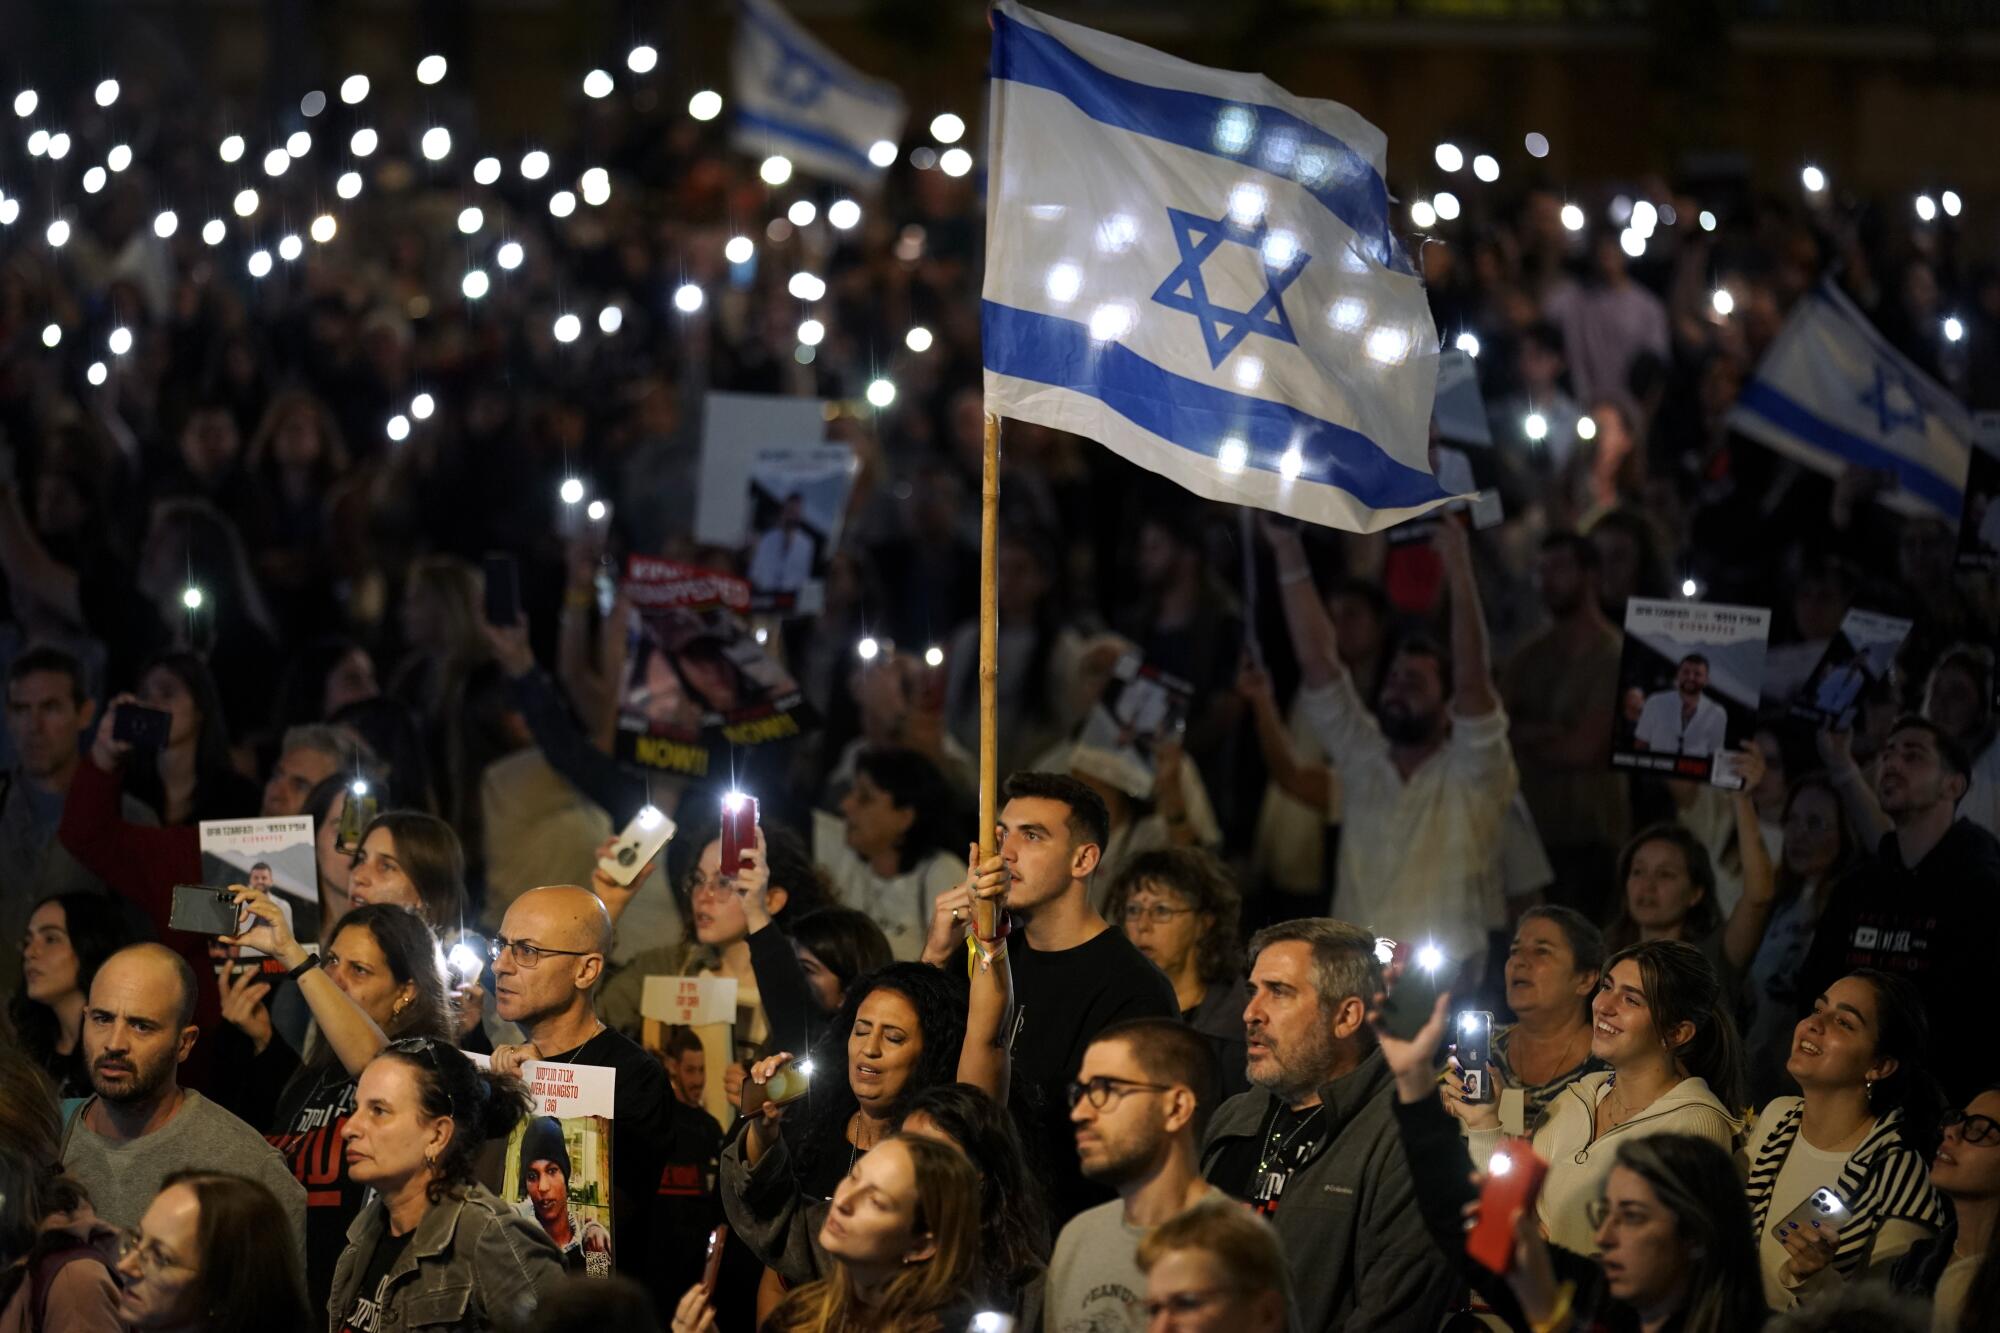 People hold up lights and Israeli flags at a nighttime protest  